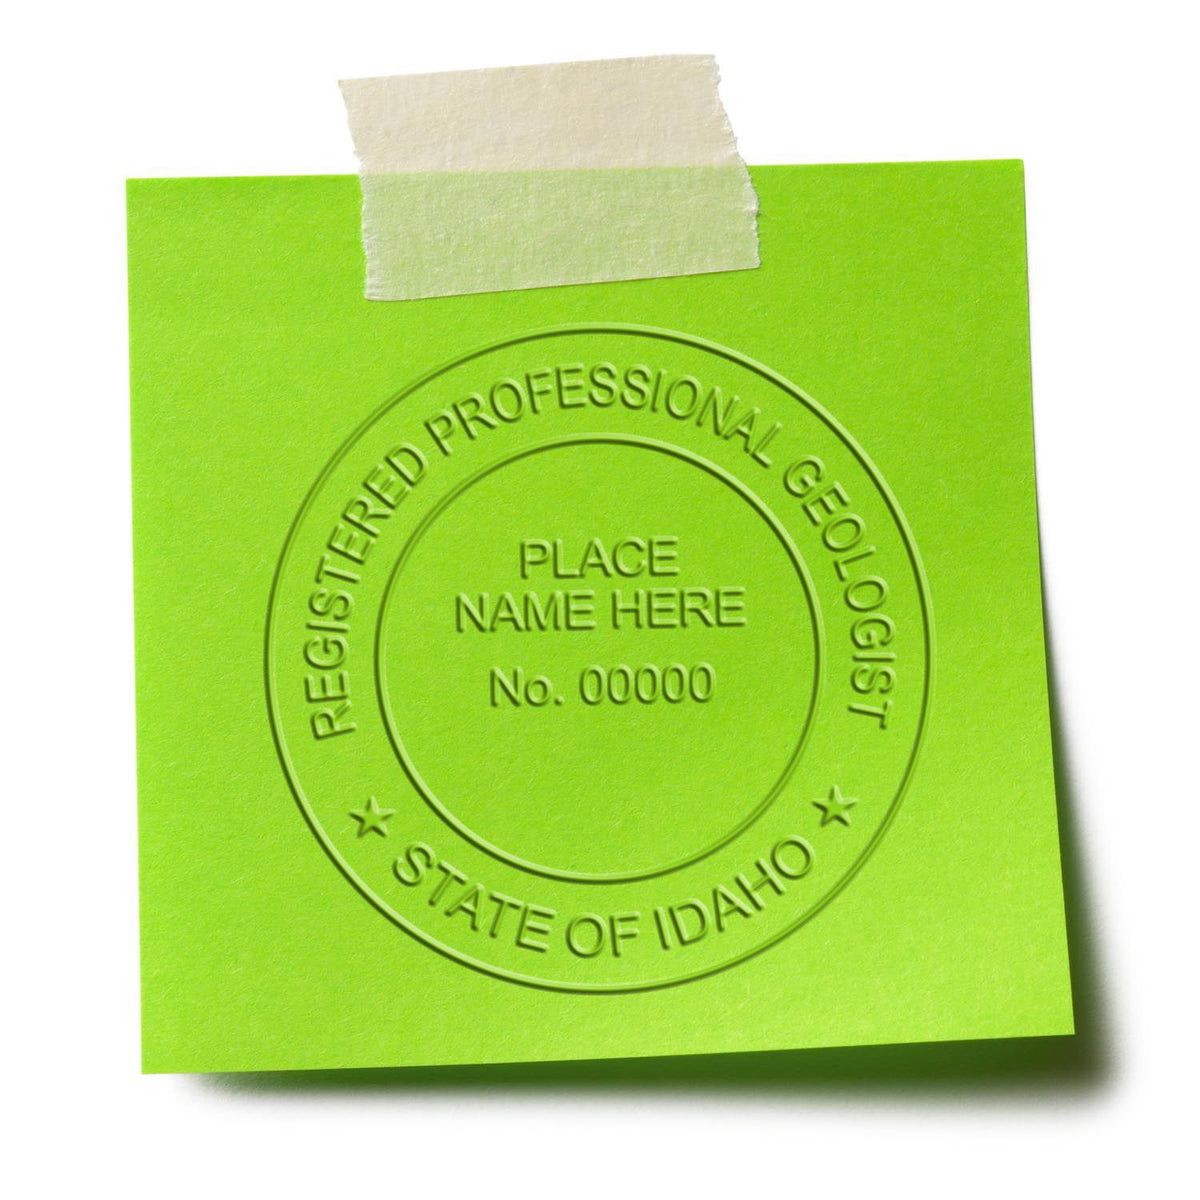 A lifestyle photo showing a stamped image of the Heavy Duty Cast Iron Idaho Geologist Seal Embosser on a piece of paper